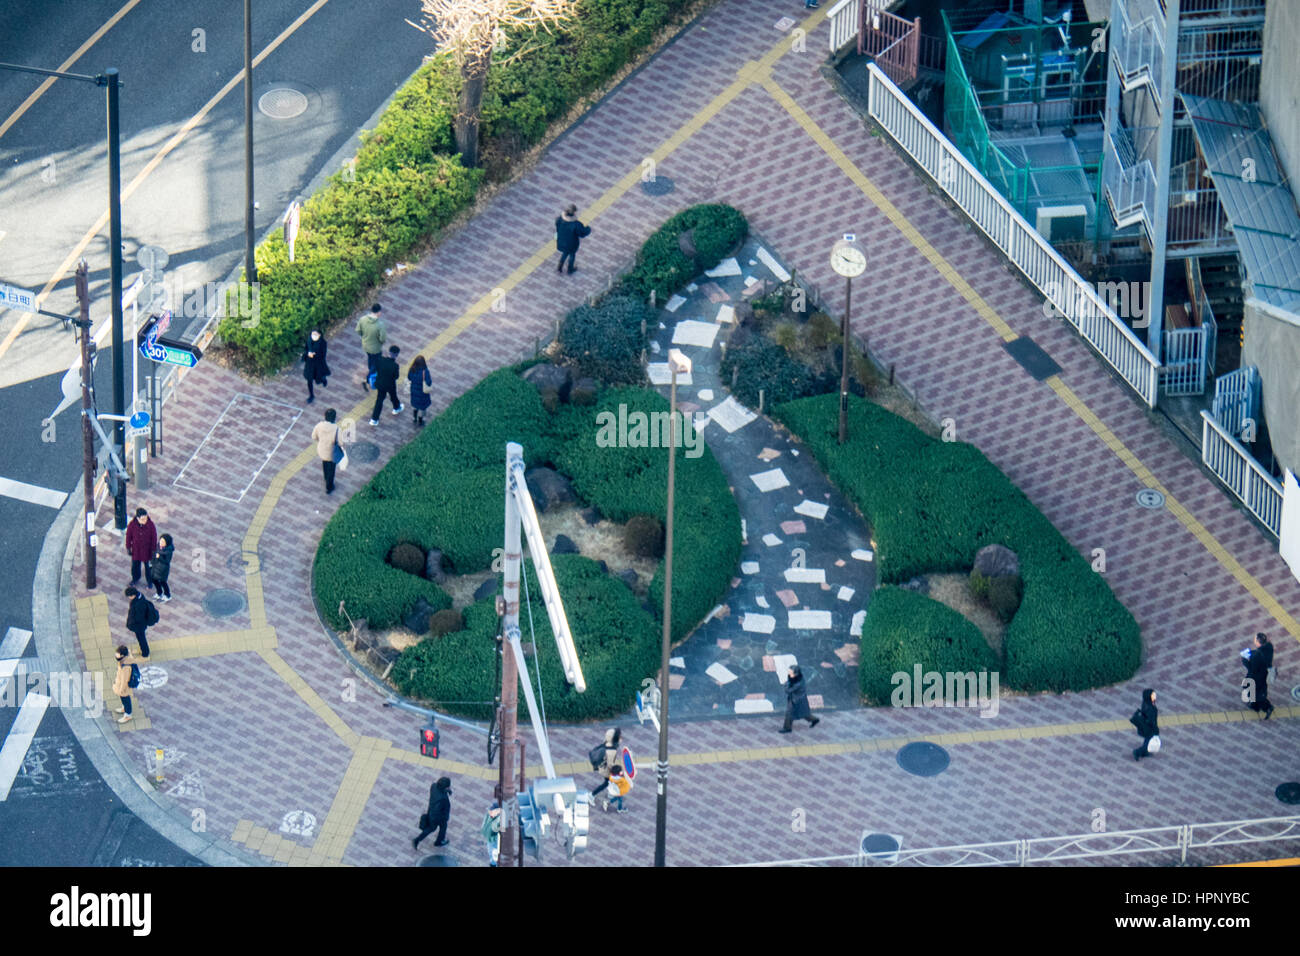 Aerial view of pedestrians at a curved intersection in Bunkyo, Tokyo. Stock Photo